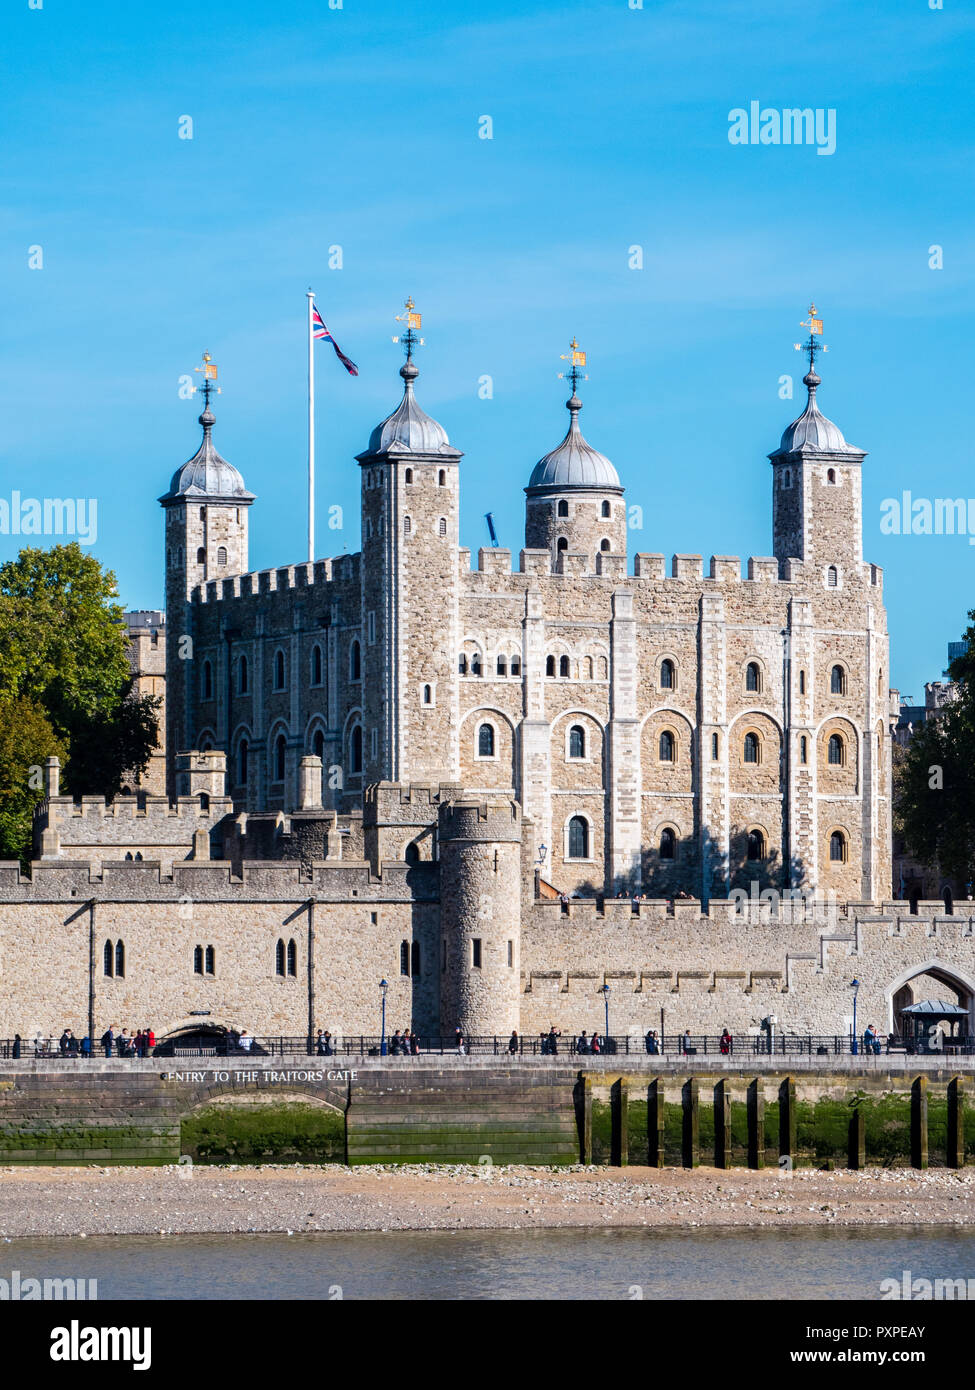 The White Tower, Tower of London Viewed from south Bank across, River Thames, London, England, UK, GB. Stock Photo